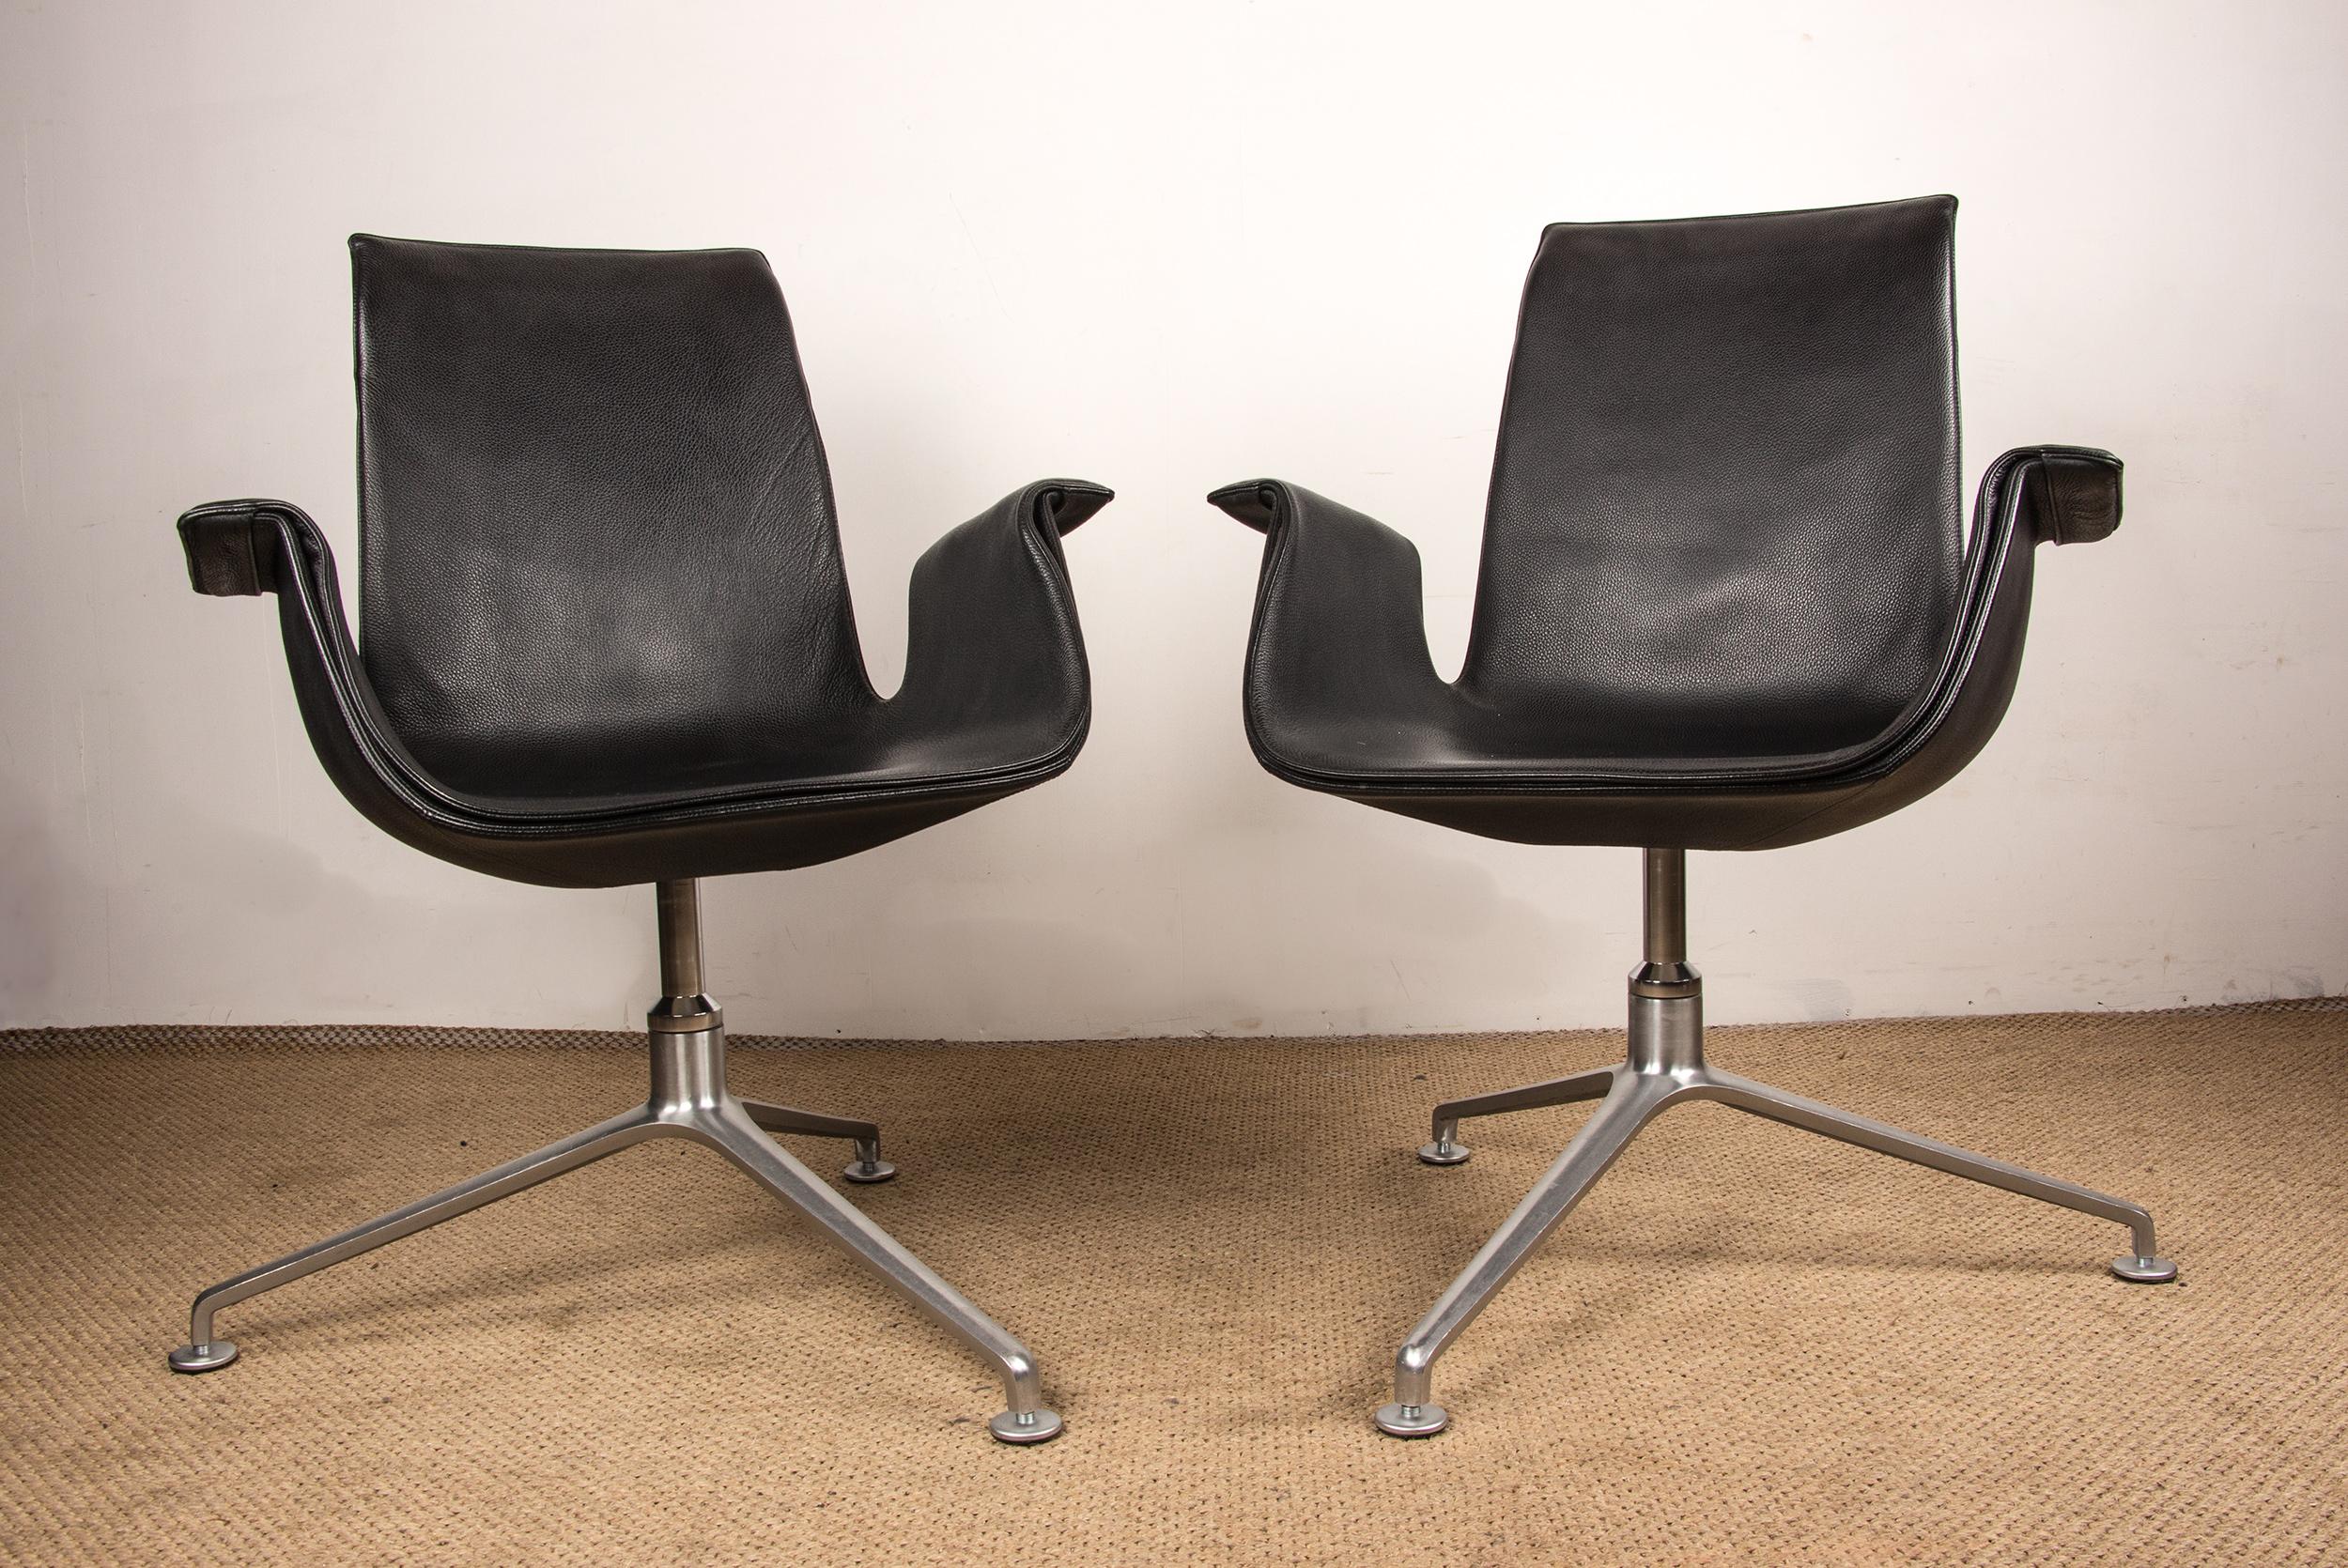 2 Danish deskchairs, Leather and steel, “Tulip chair” by Fabricius & Kalsthom. For Sale 3